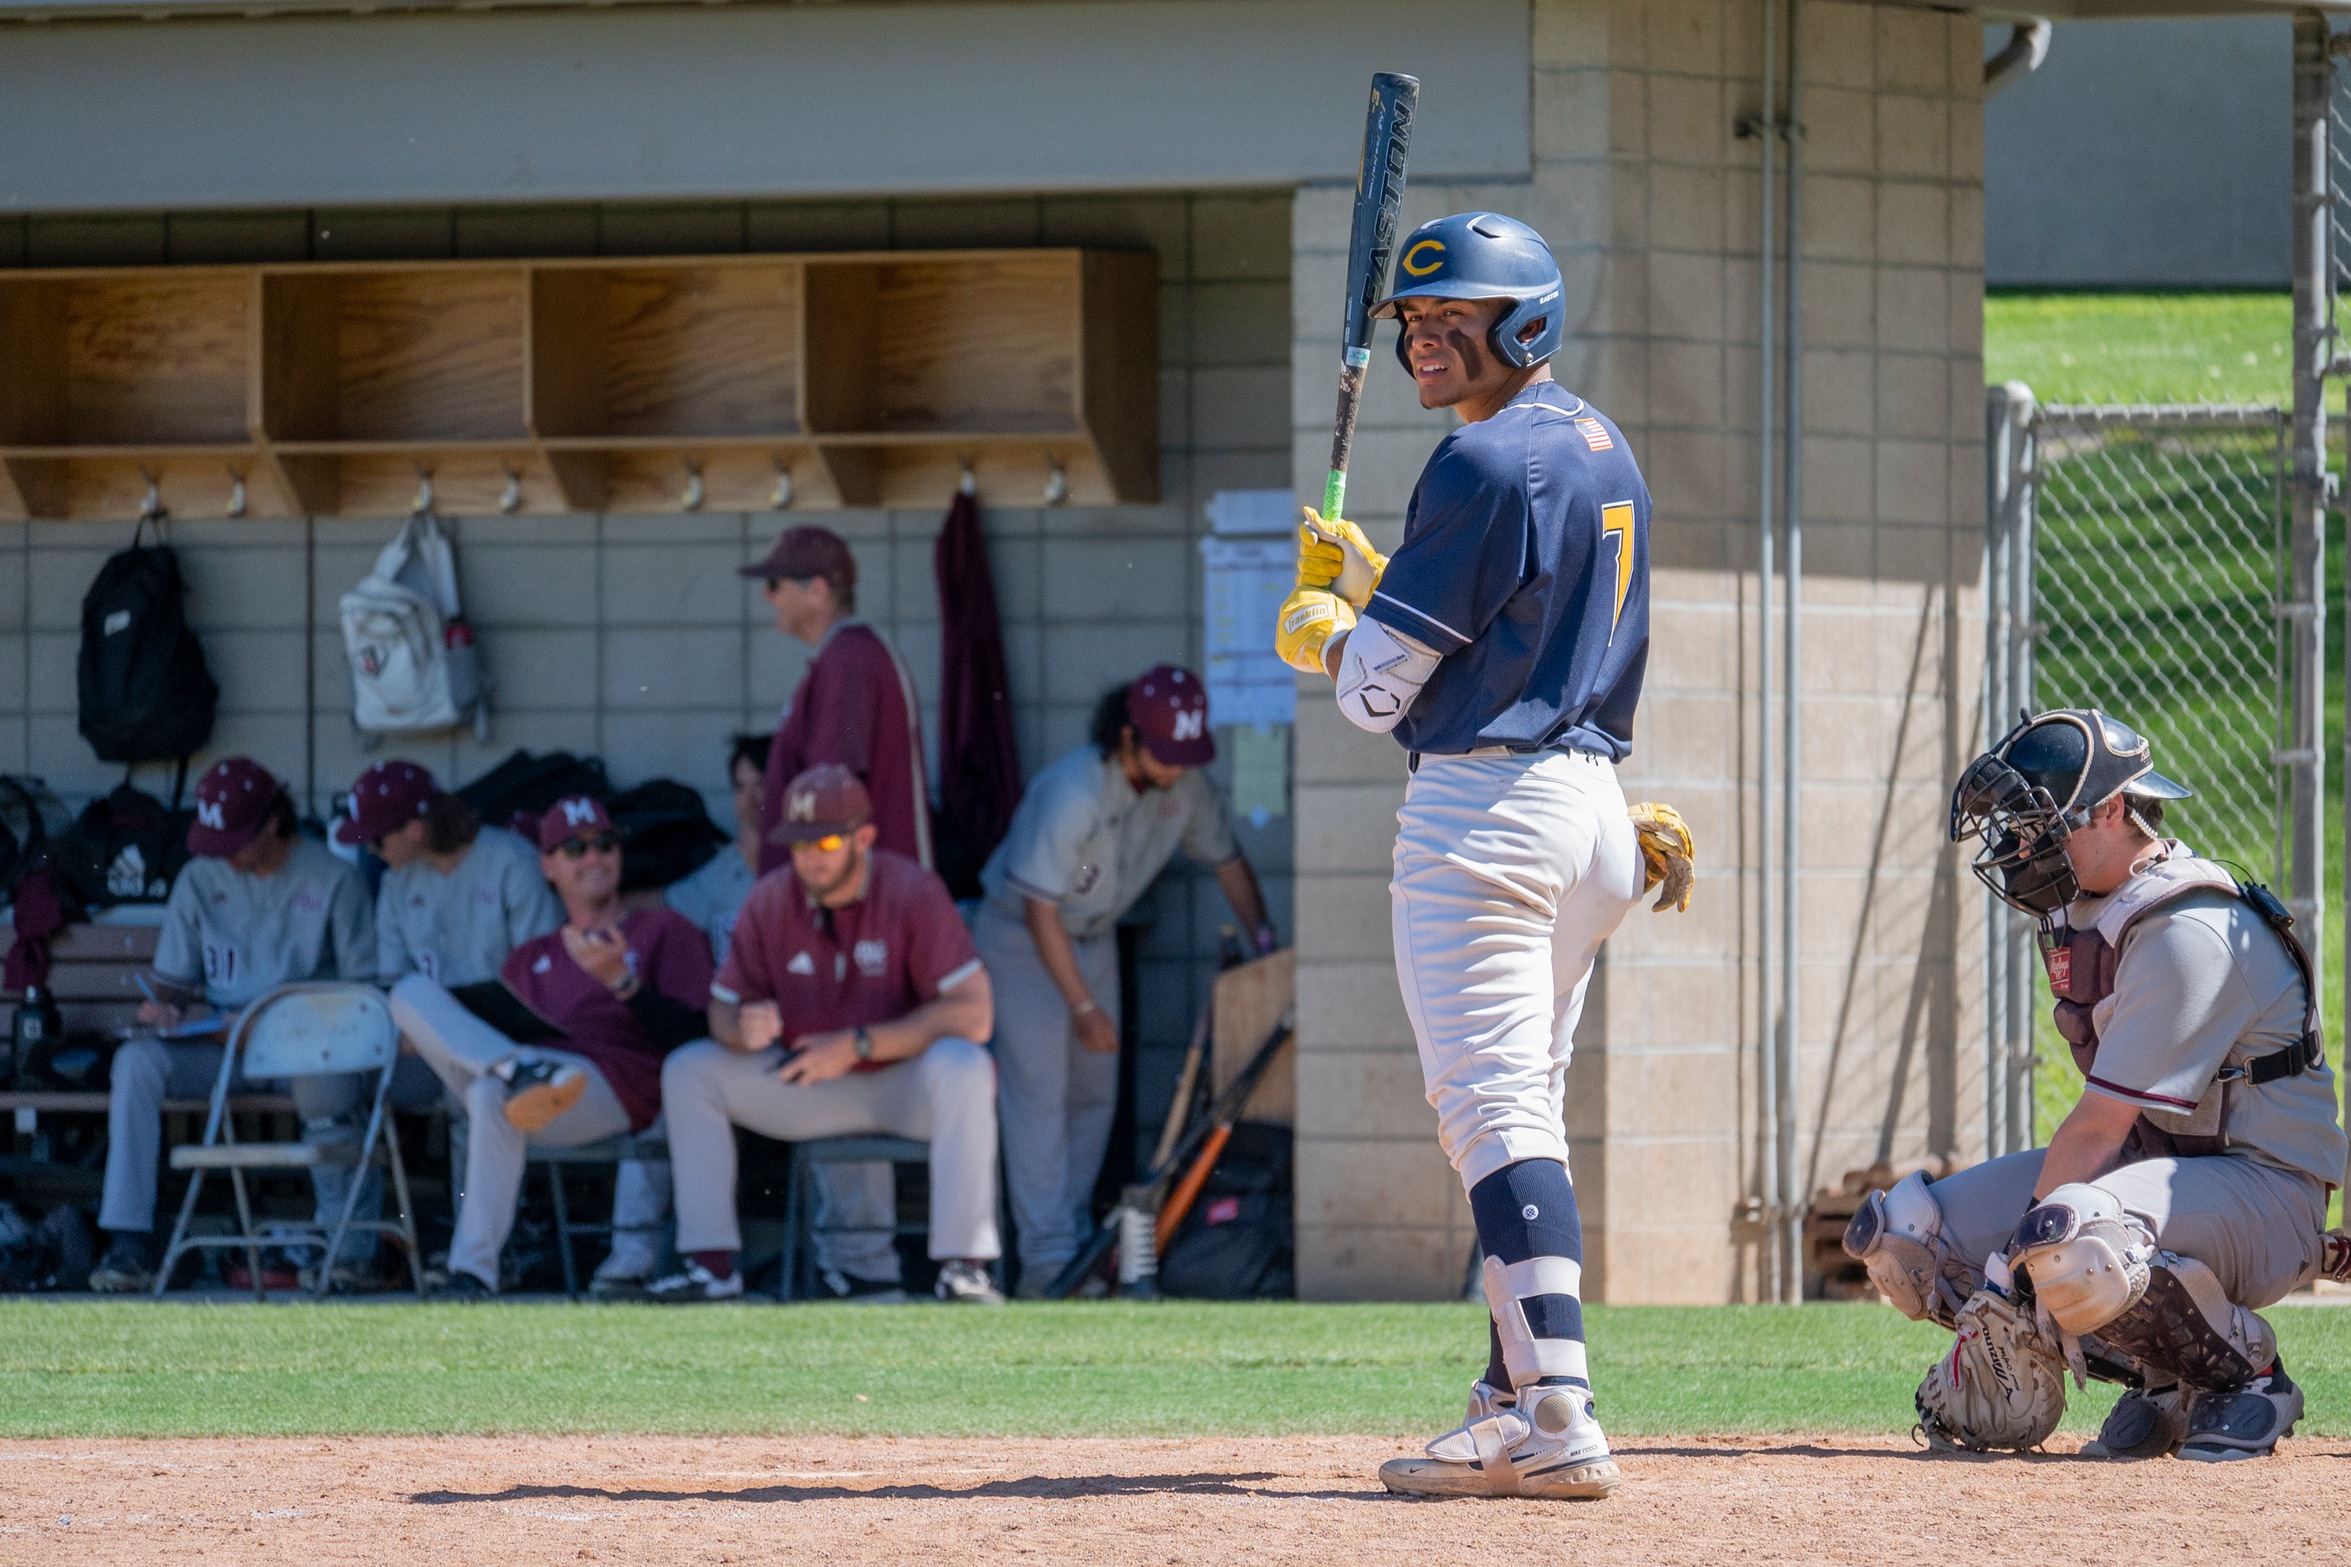 College of the Canyons baseball player Angelo Aleman standing at home plate with a baseball bat.